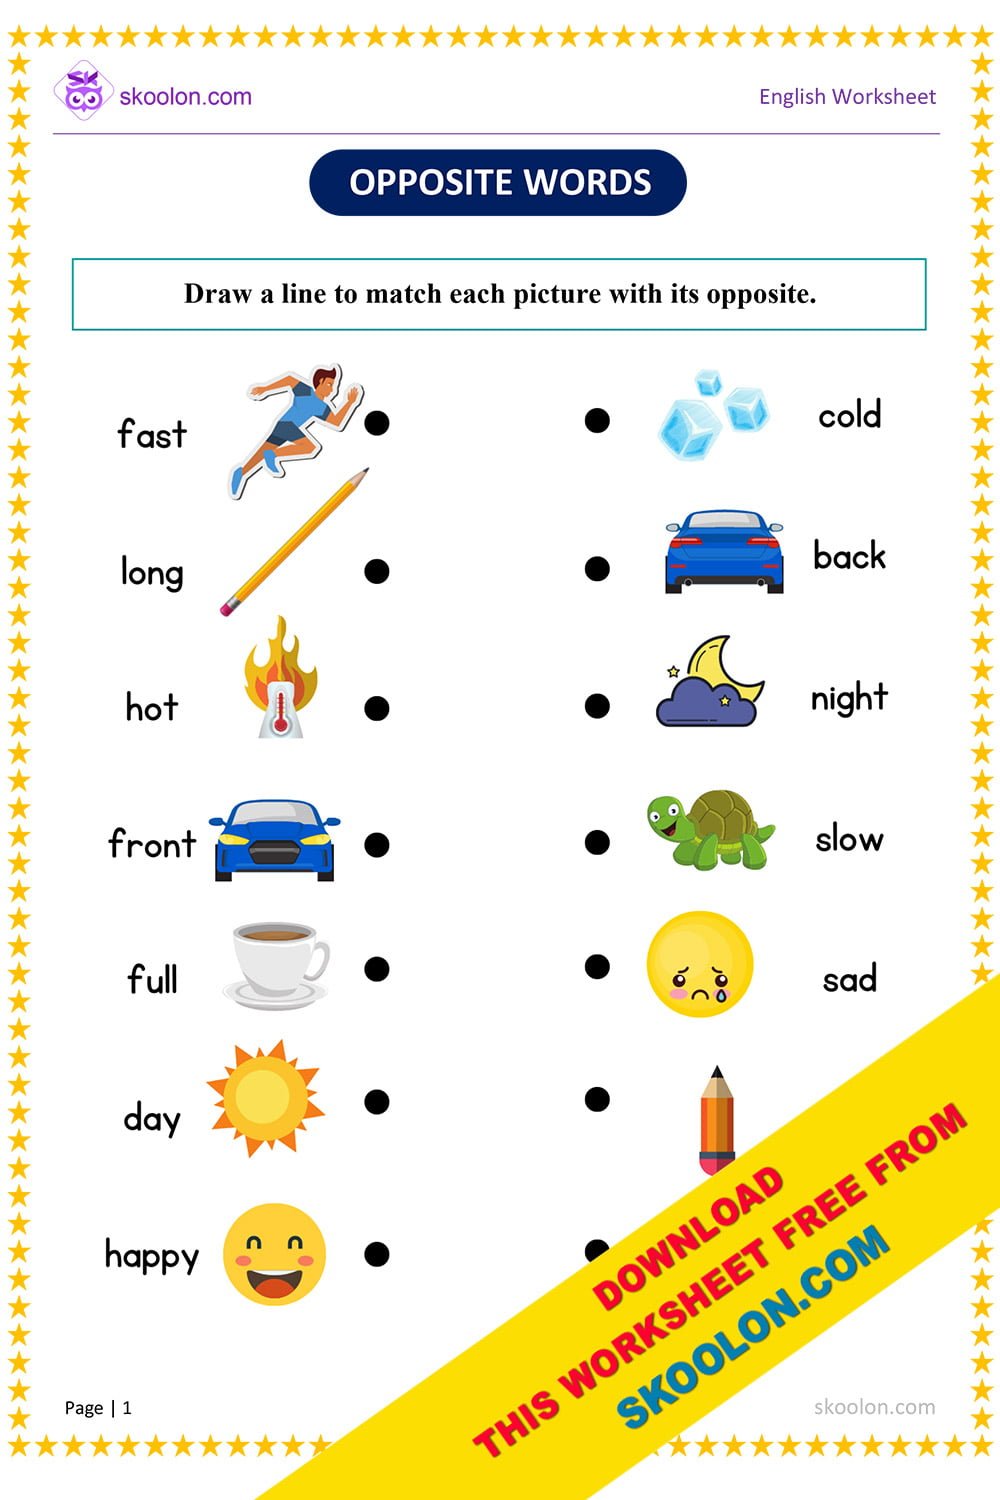 Opposite Words Worksheet For Class 1 With Answers